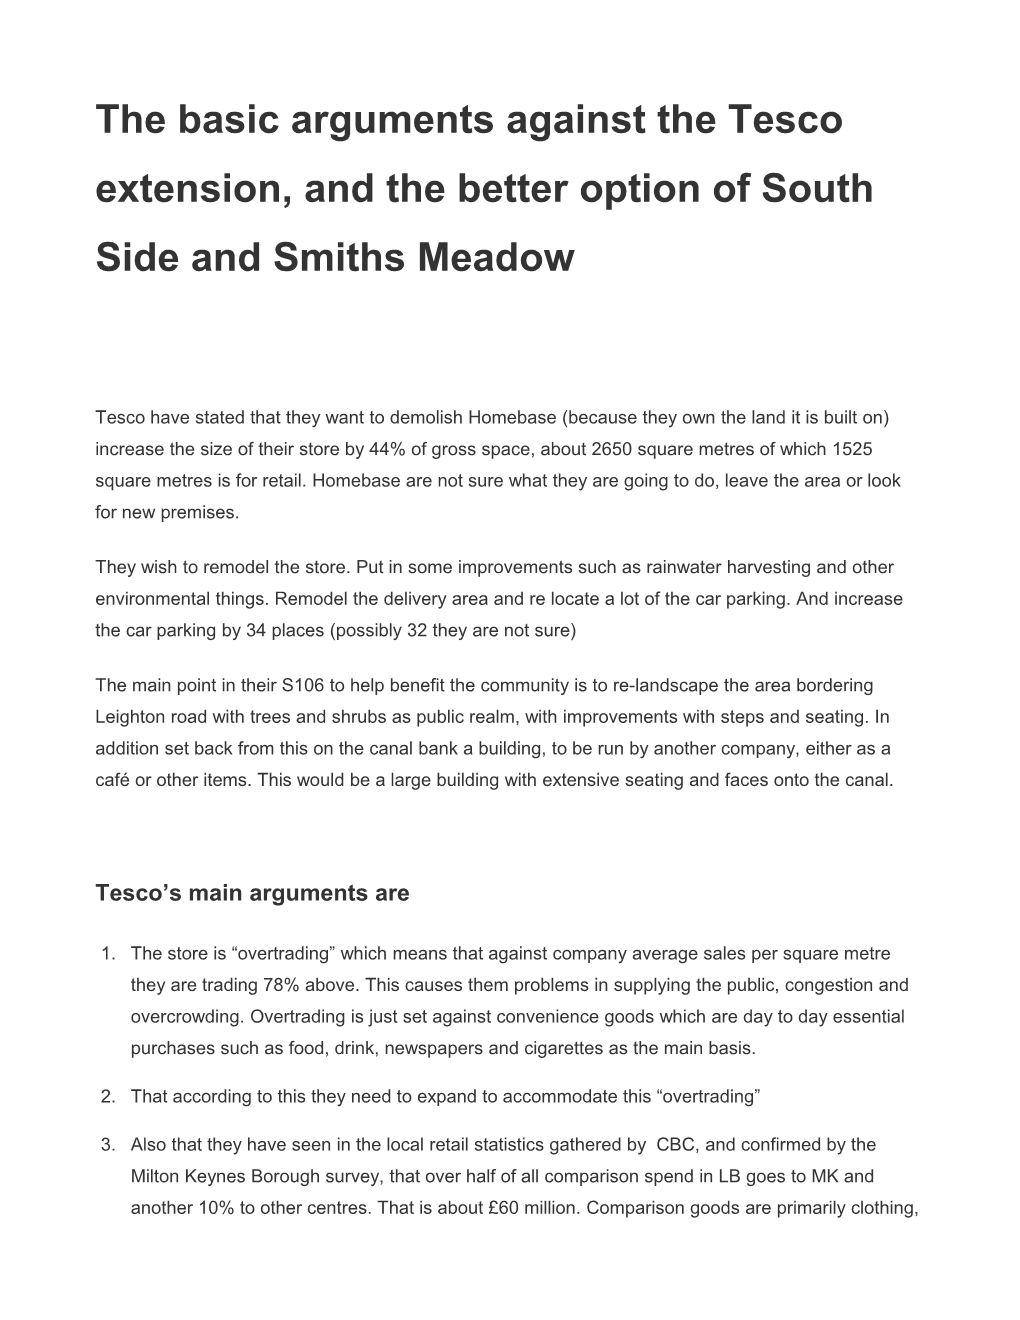 The Basic Arguments Against the Tesco Extension and the Better Option of South Side And